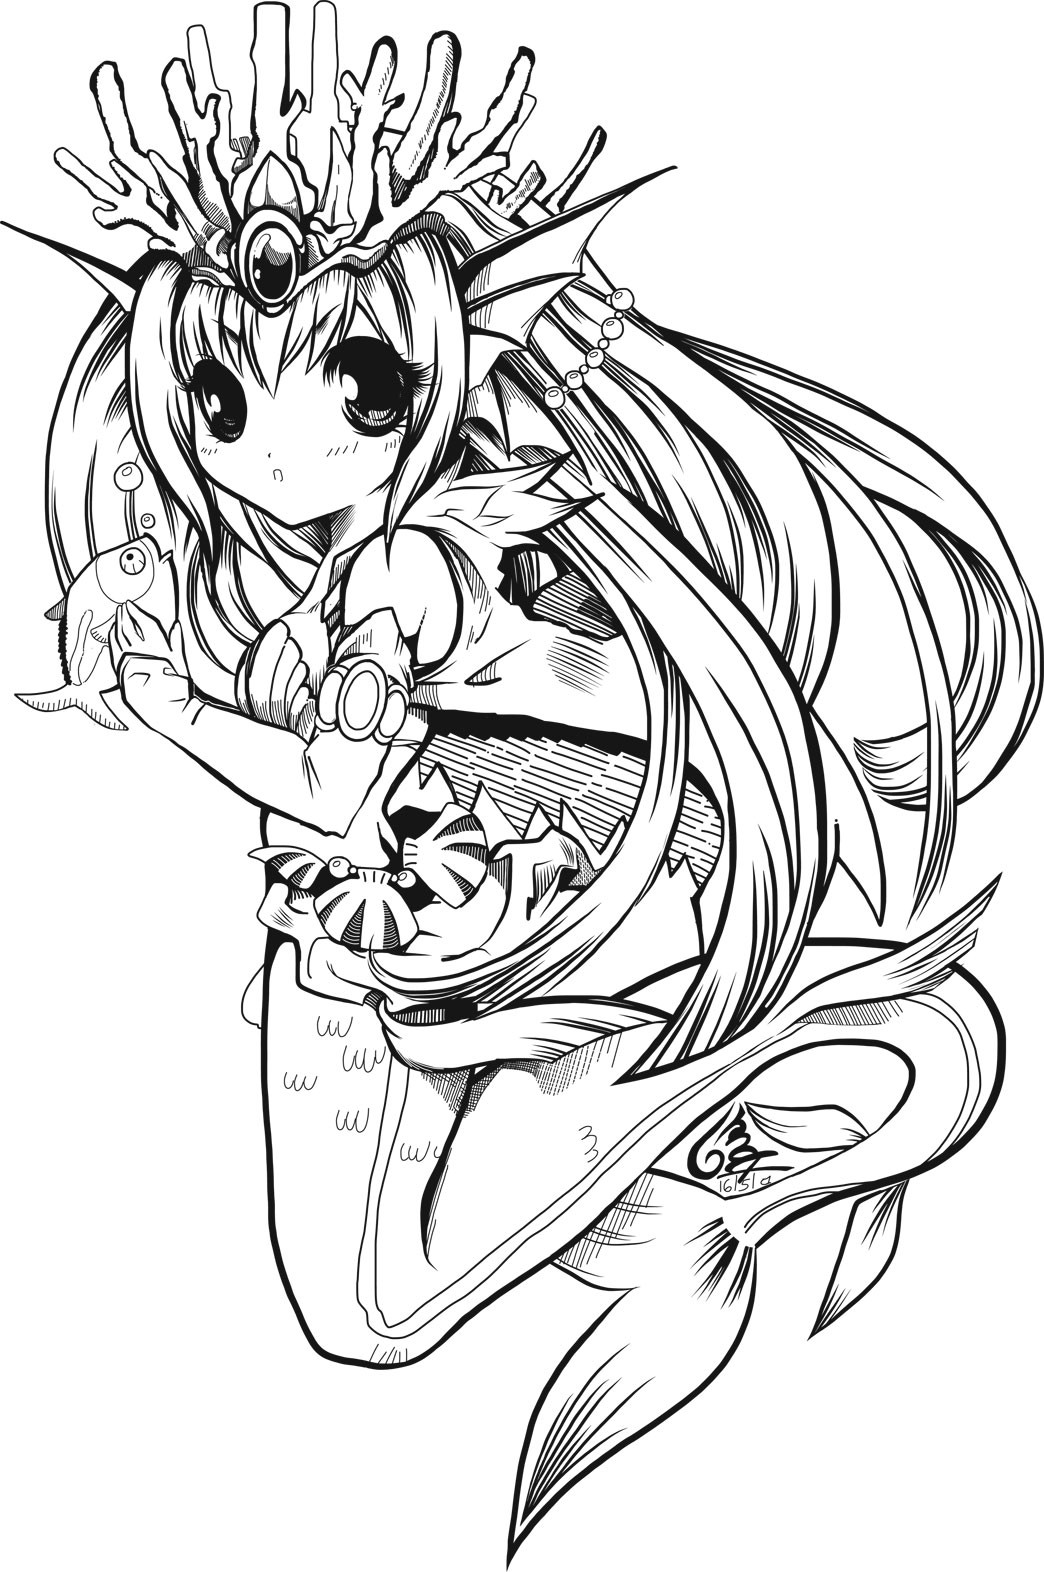 Anime Mermaid Coloring Pages
 Siren the Enchanter Inks by WillPetrey on DeviantArt